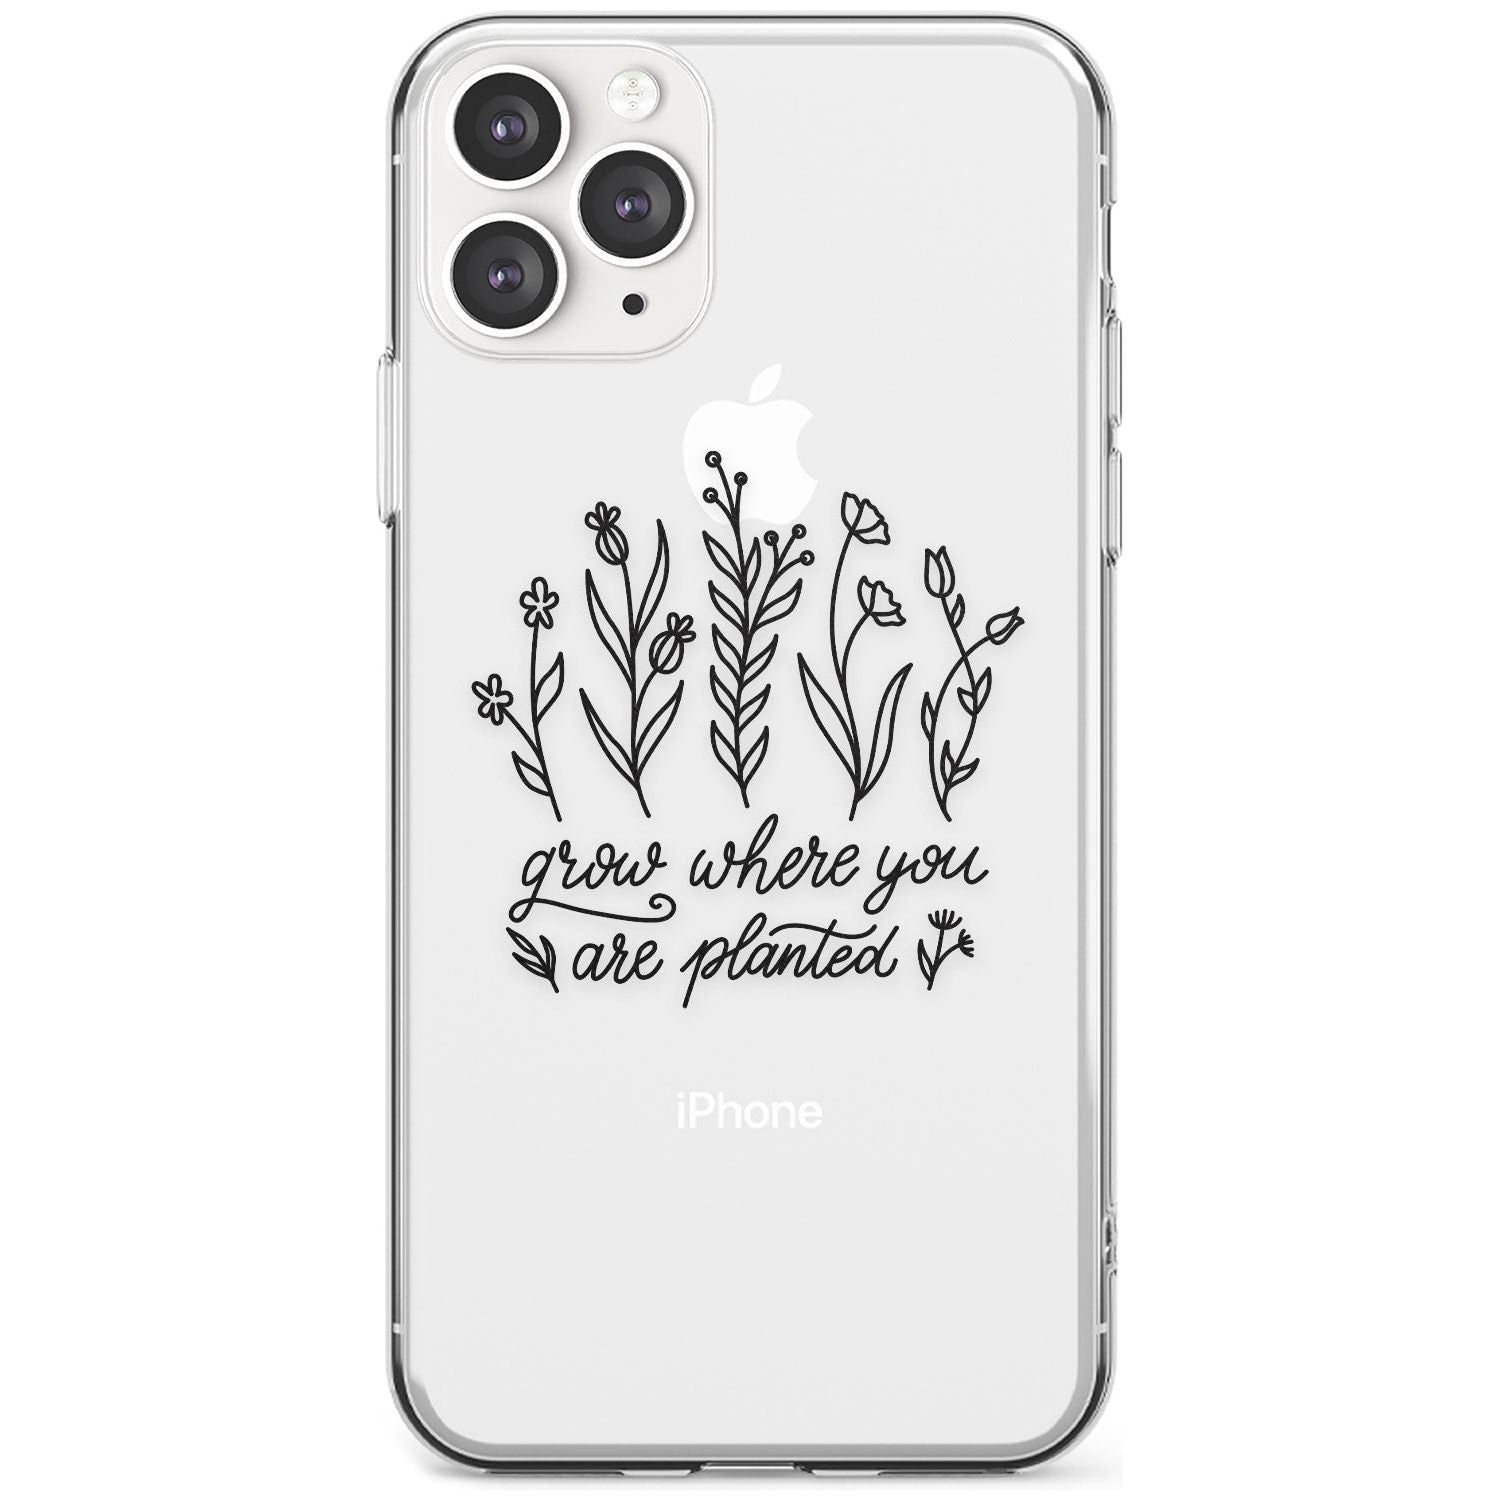 Grow where you are planted Slim TPU Phone Case for iPhone 11 Pro Max